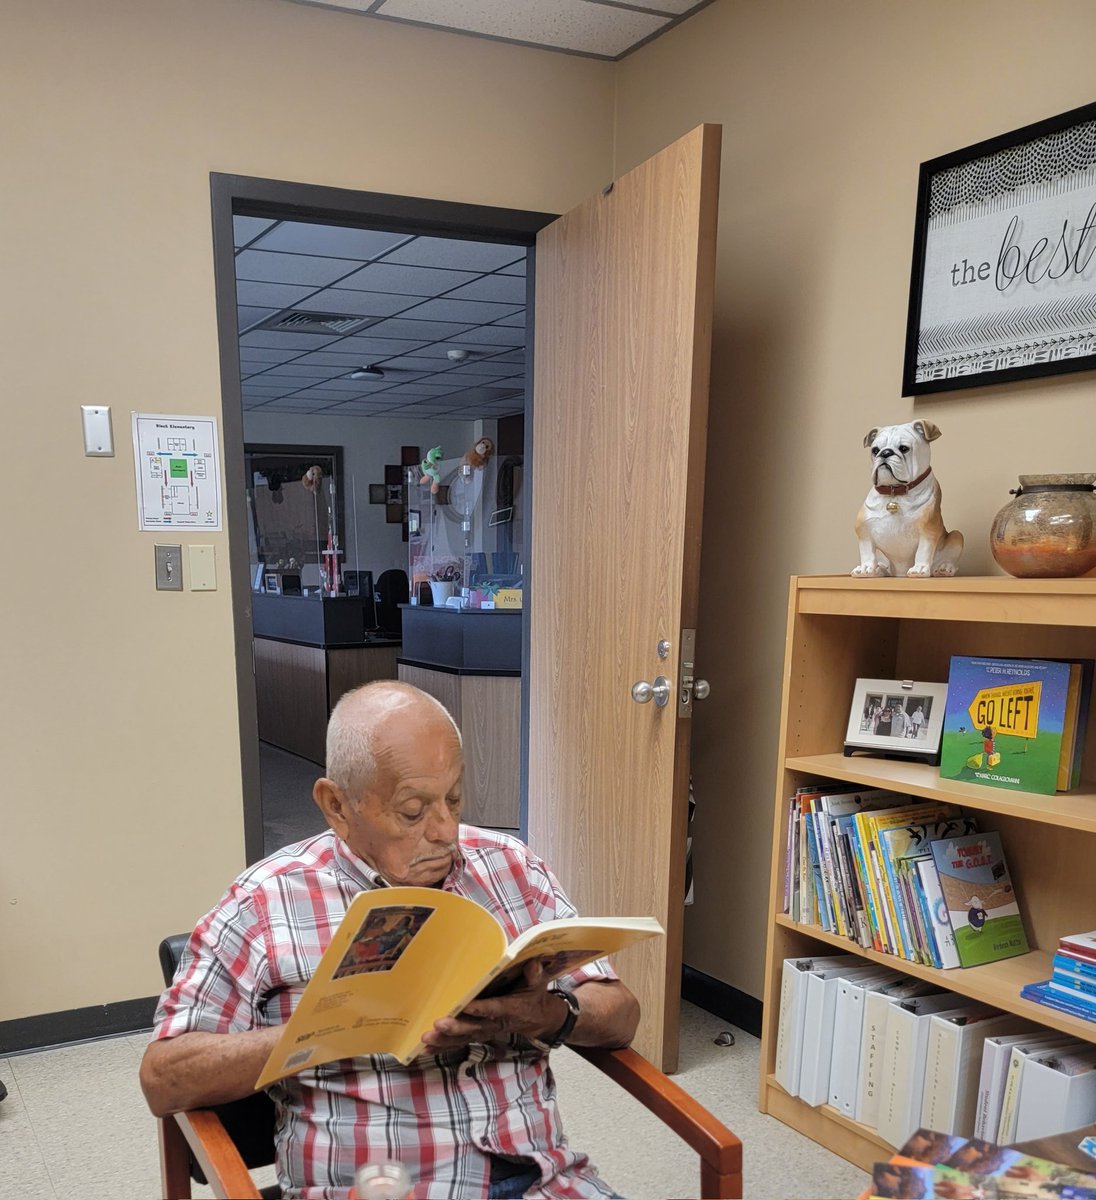 My dad came to the school with me this morning. He found a Spanish book about Oaxaca, his birthplace in my office library, so he HAD to read it.  He said he was verifying what his teacher, Maestro David, taught him in elementary almost 80 years ago. #LifelongReader